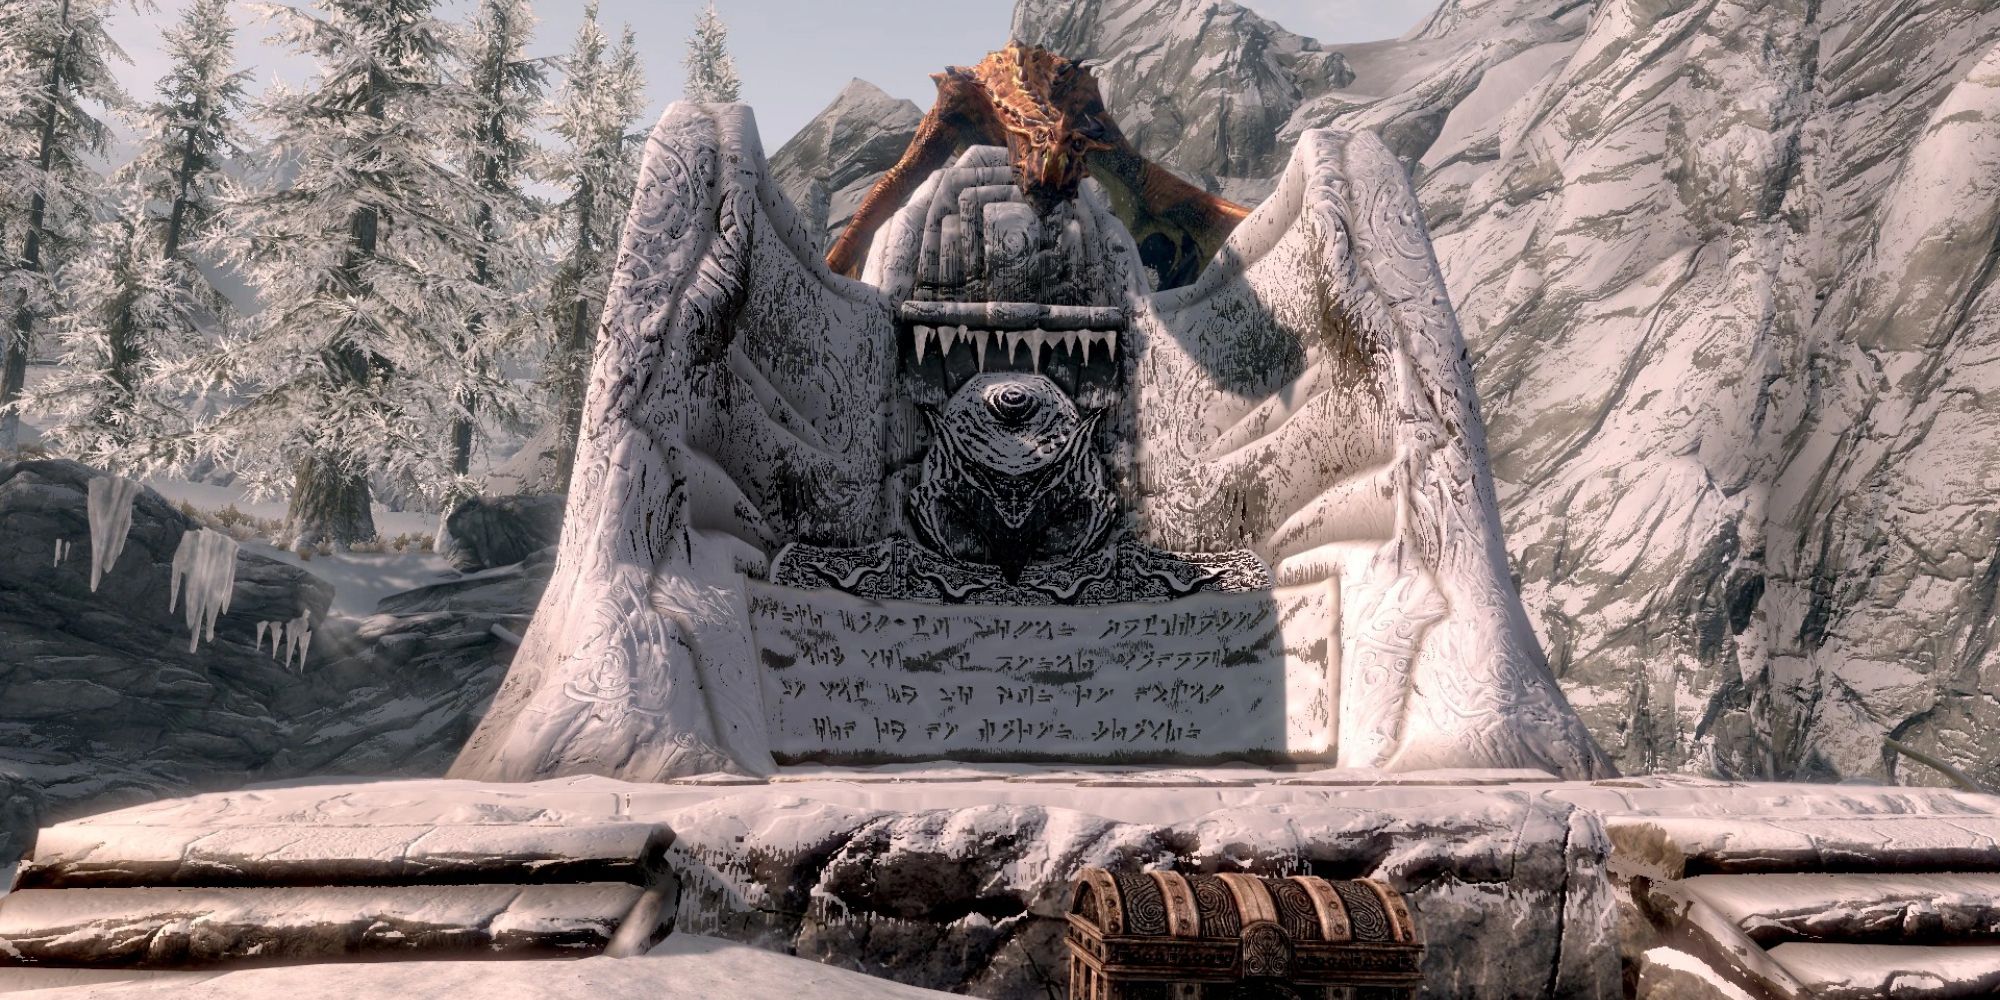 Skyrim Dragon at Ancient's Ascent, on a word wall